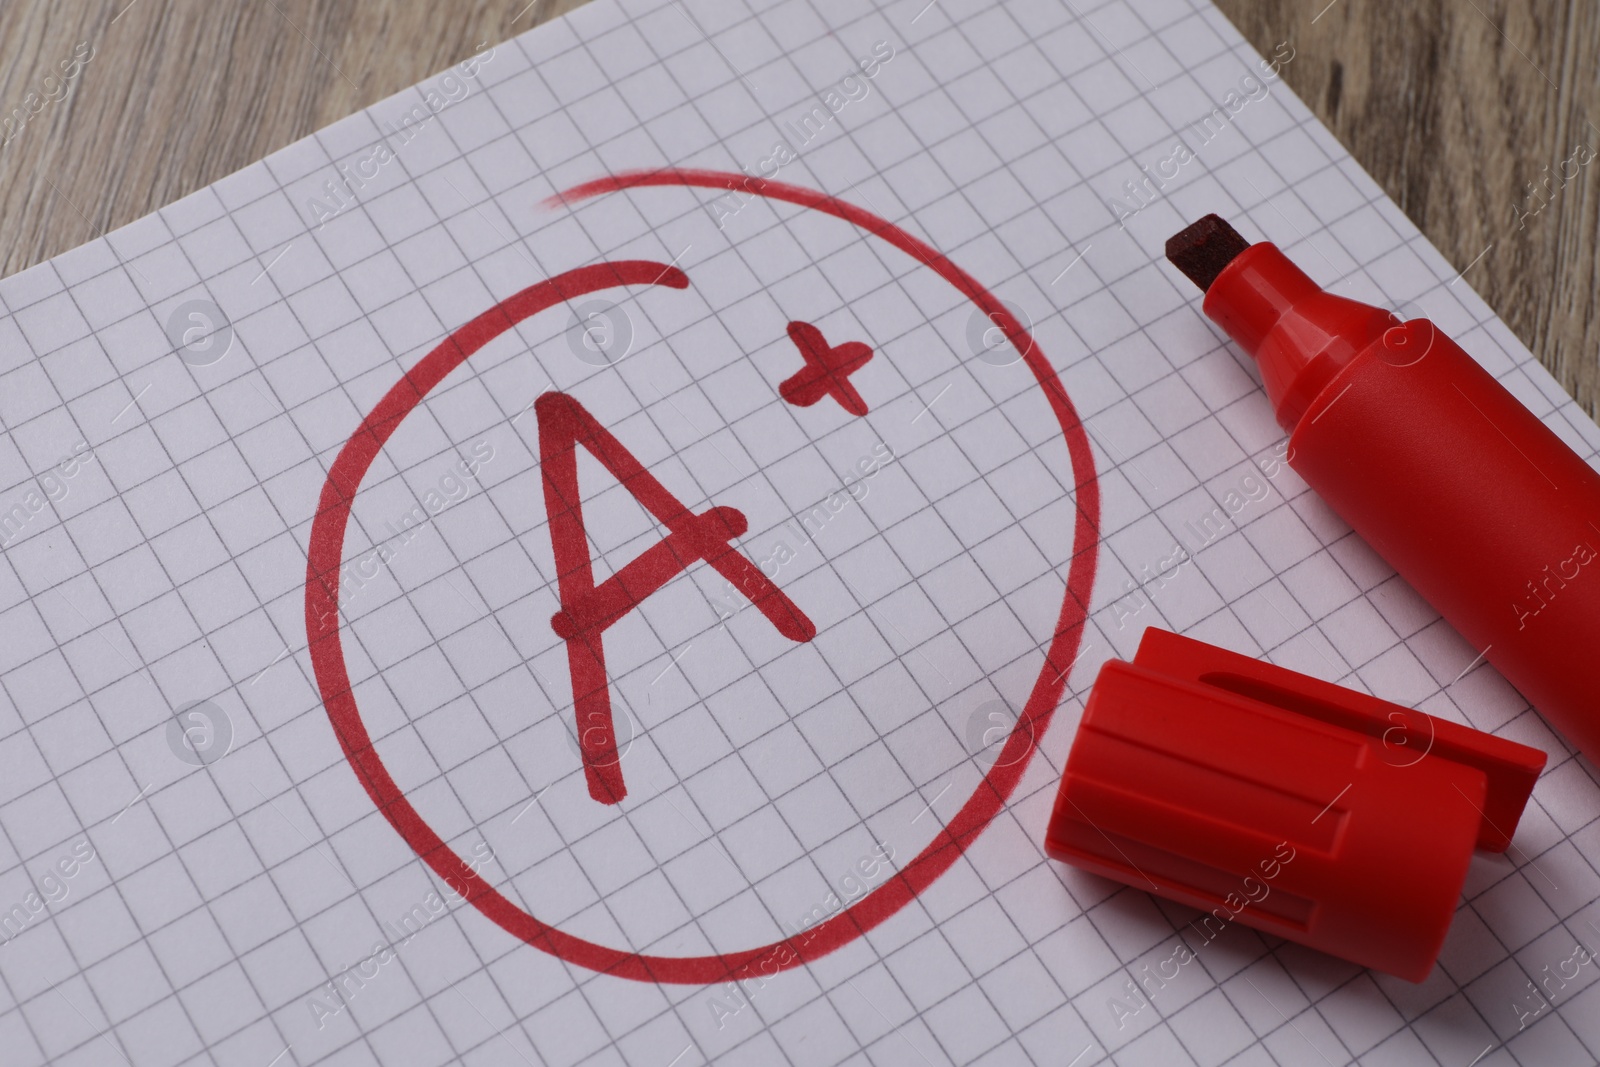 Photo of School grade. Red letter A with plus symbol on notebook paper and marker on table, closeup